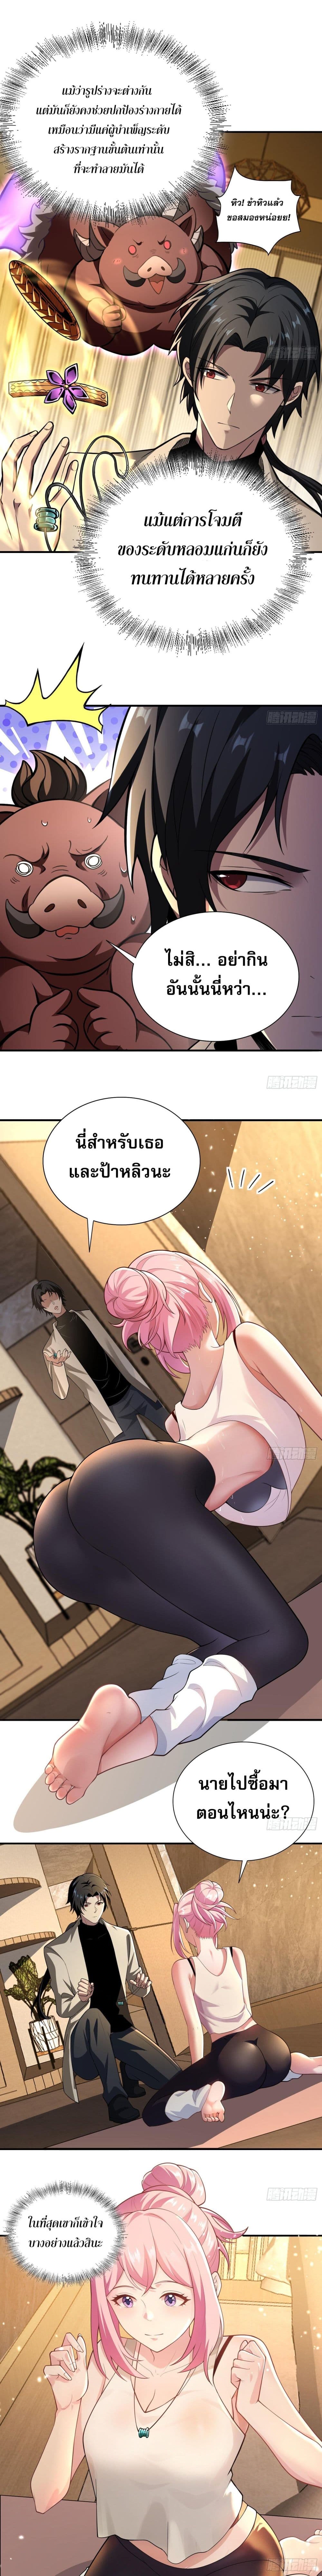 The All-Knowing Cultivator ผู้ฝึกตนผู้รอบรู้ 4/12